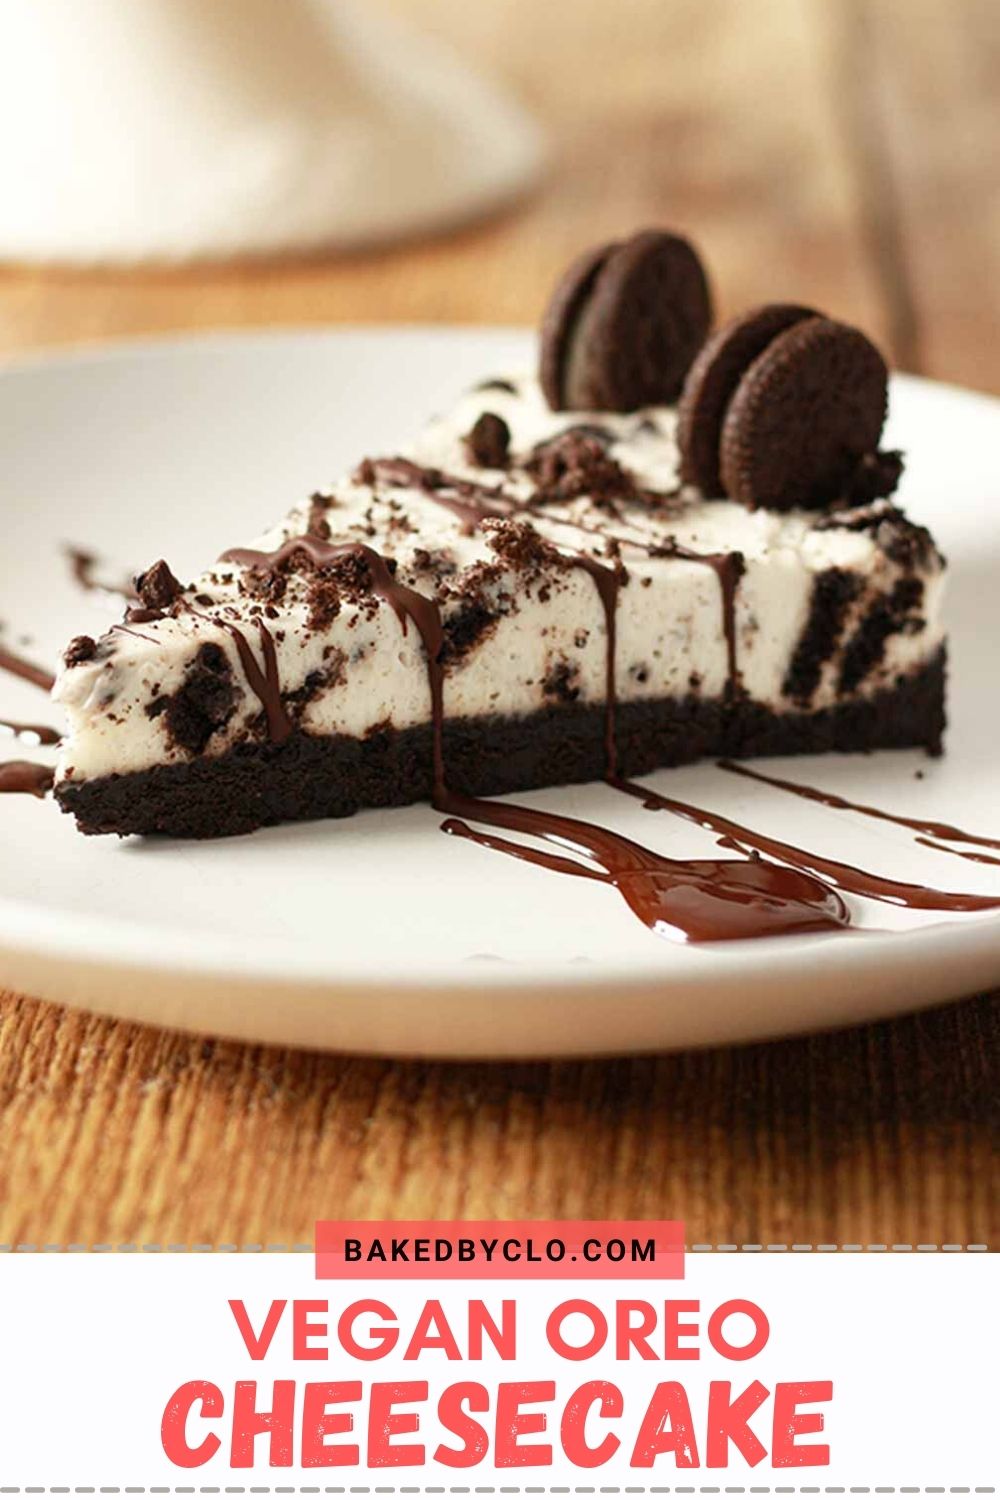 Pinterest pin with an image of an Oreo cheesecake slice on it